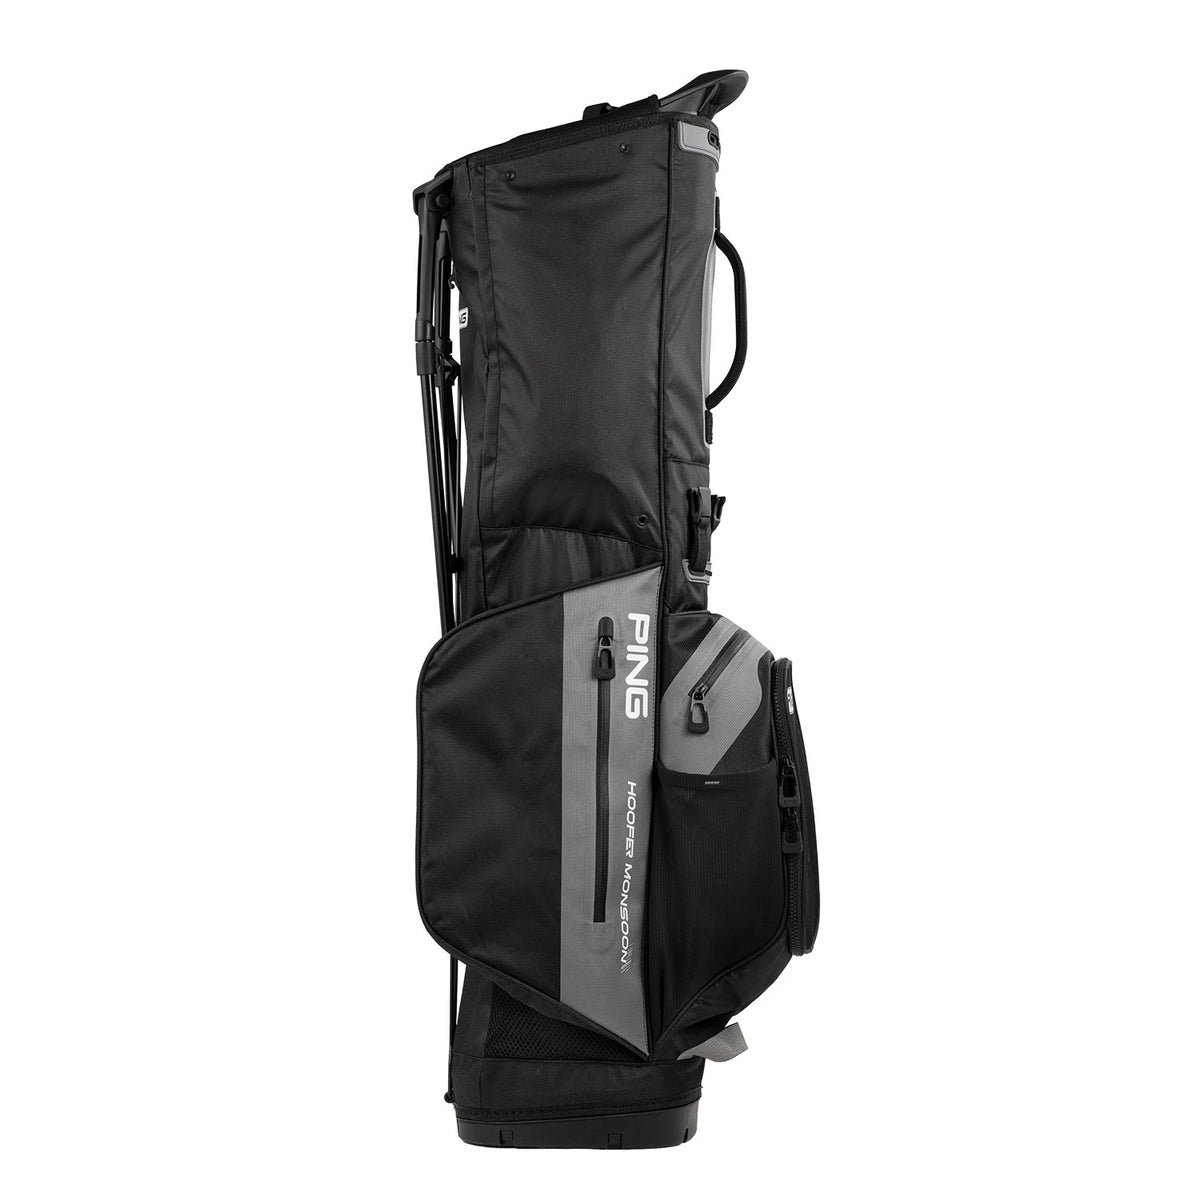 Ping Hoofer Mansoon Stand Bag